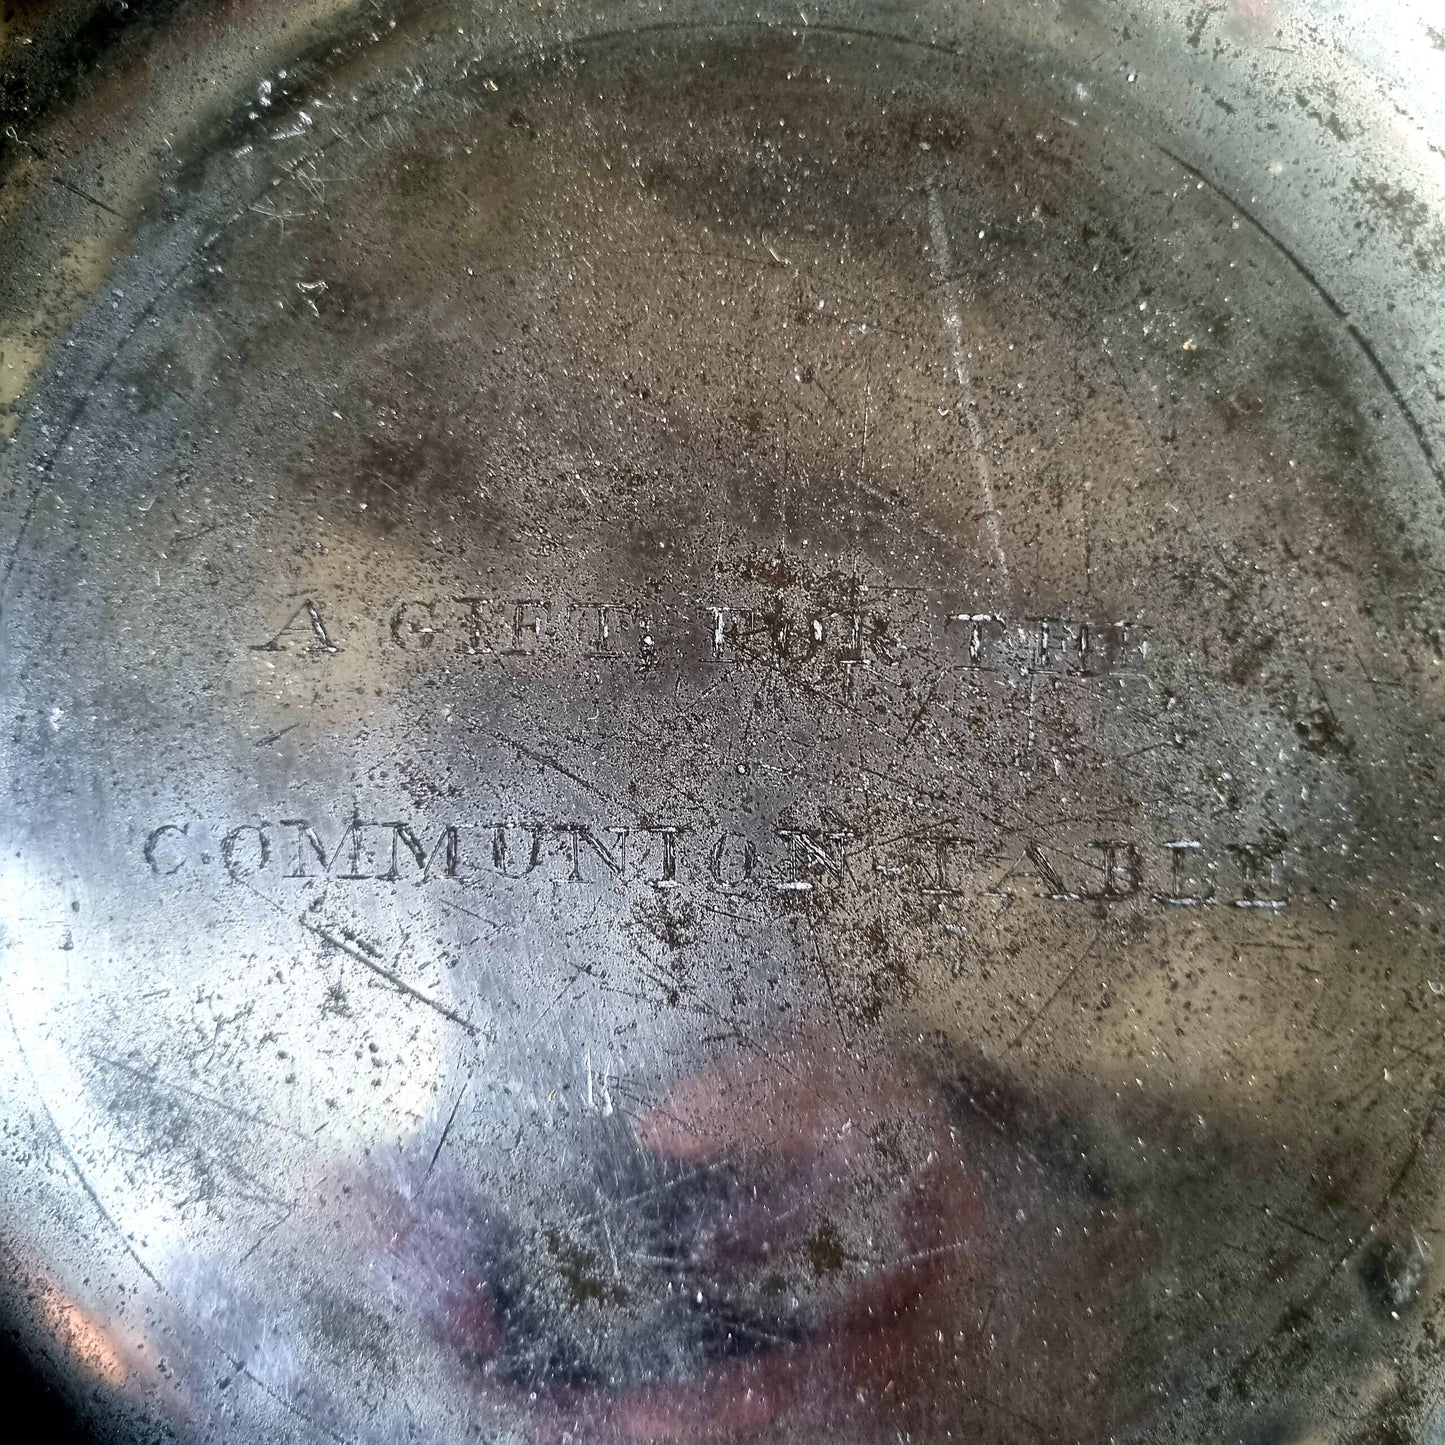 18th Century English Antique Pewter Communion Wafer Plate or Collection Plate, Inscribed "a gift for the communion table", Bearing London Touchmarks